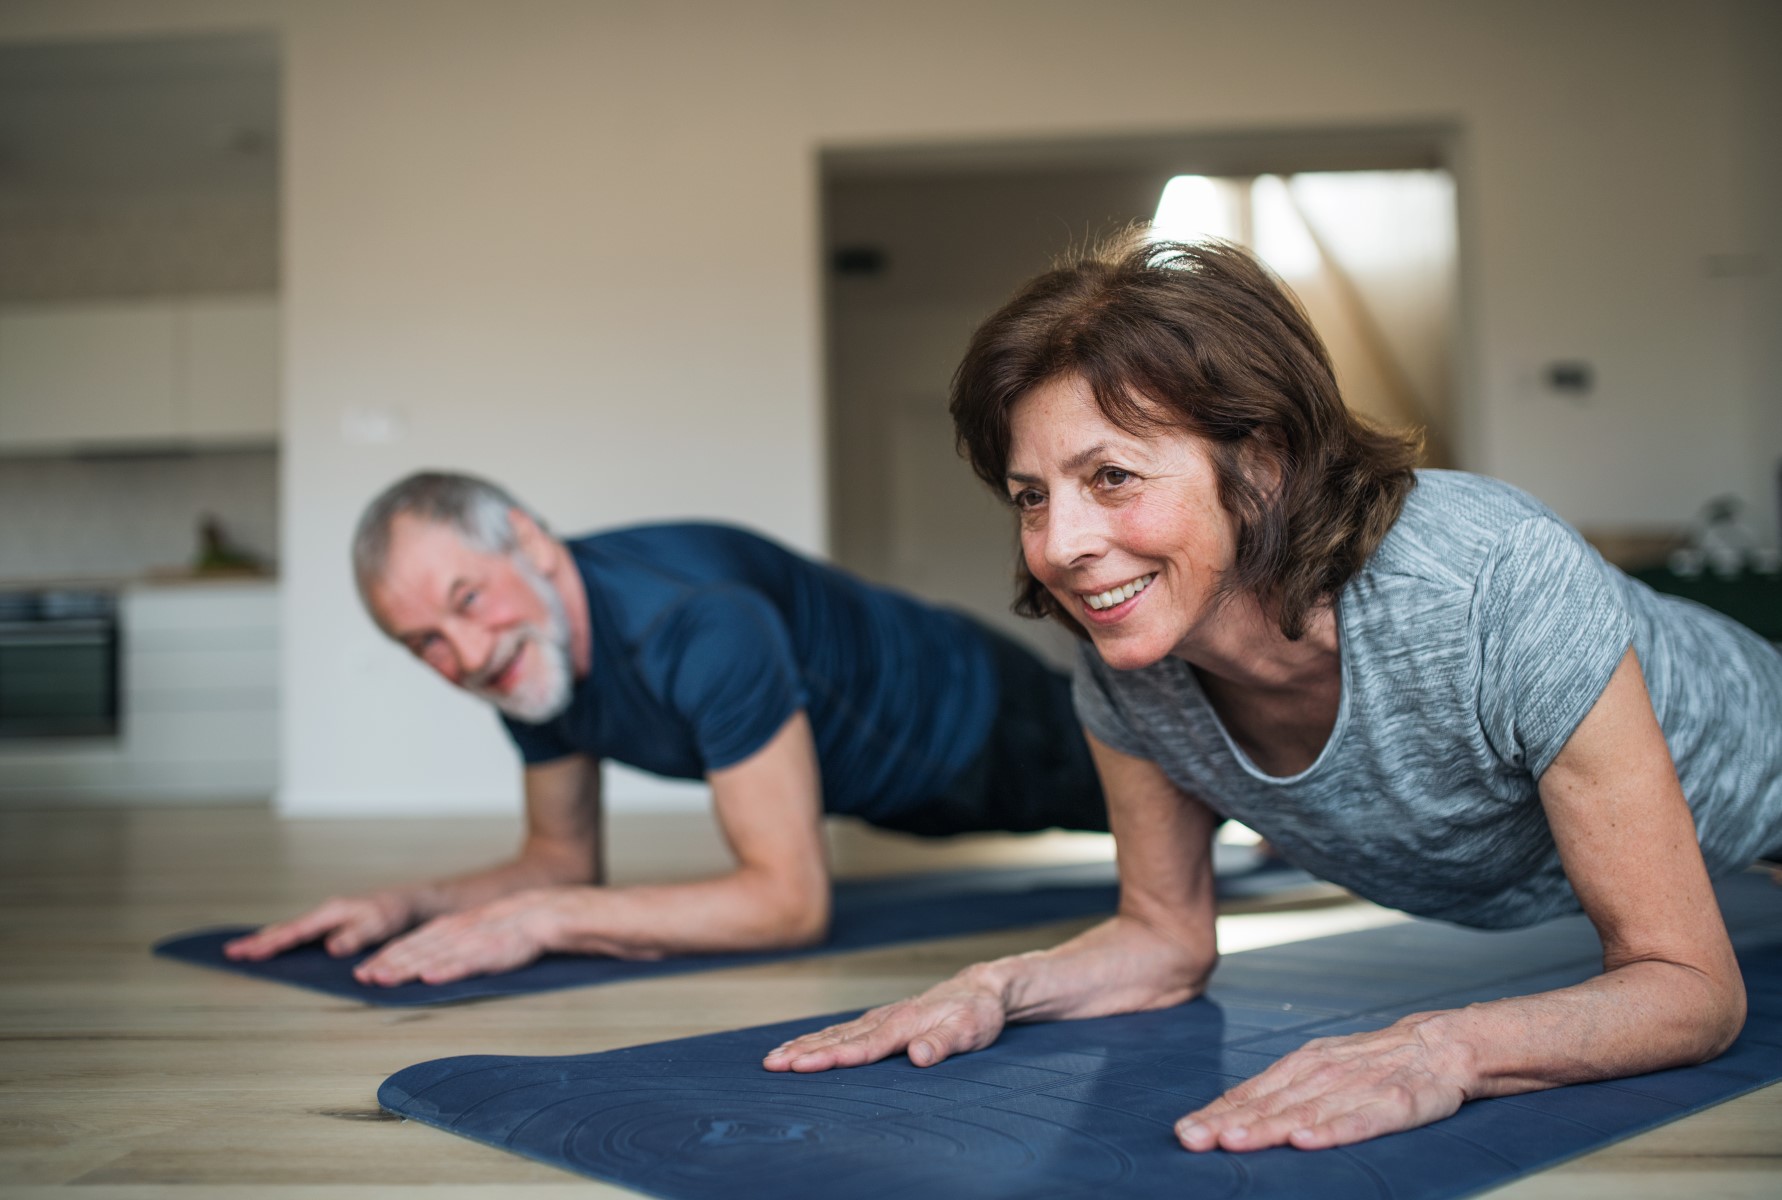 5 Day Exercise At Home For Seniors Australia for Weight Loss